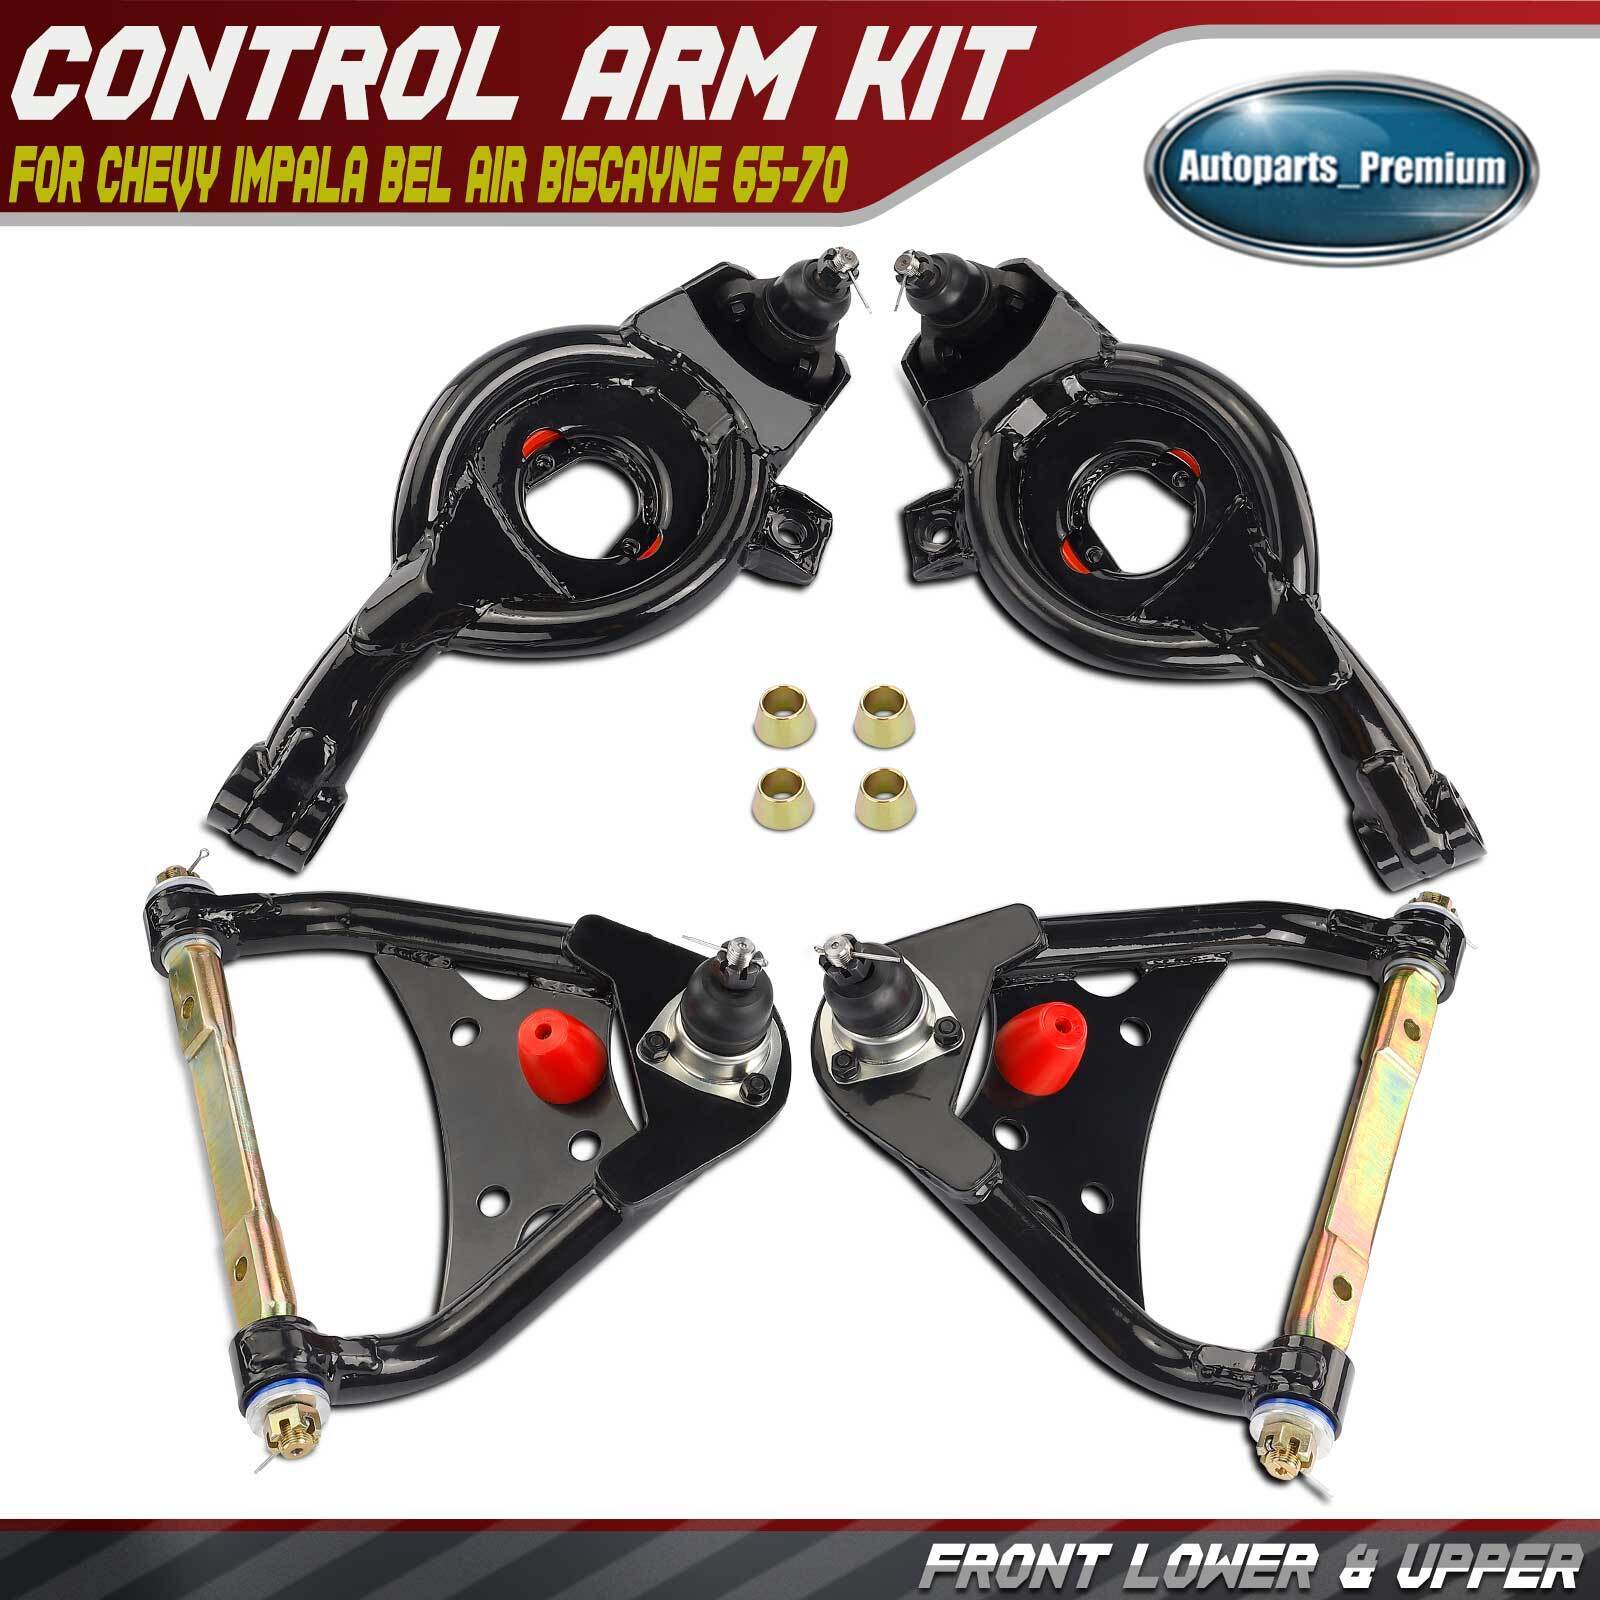 4x Front Upper&Lower Control Arm Kit for Chevy Impala Bel Air Biscayne 1965-1970